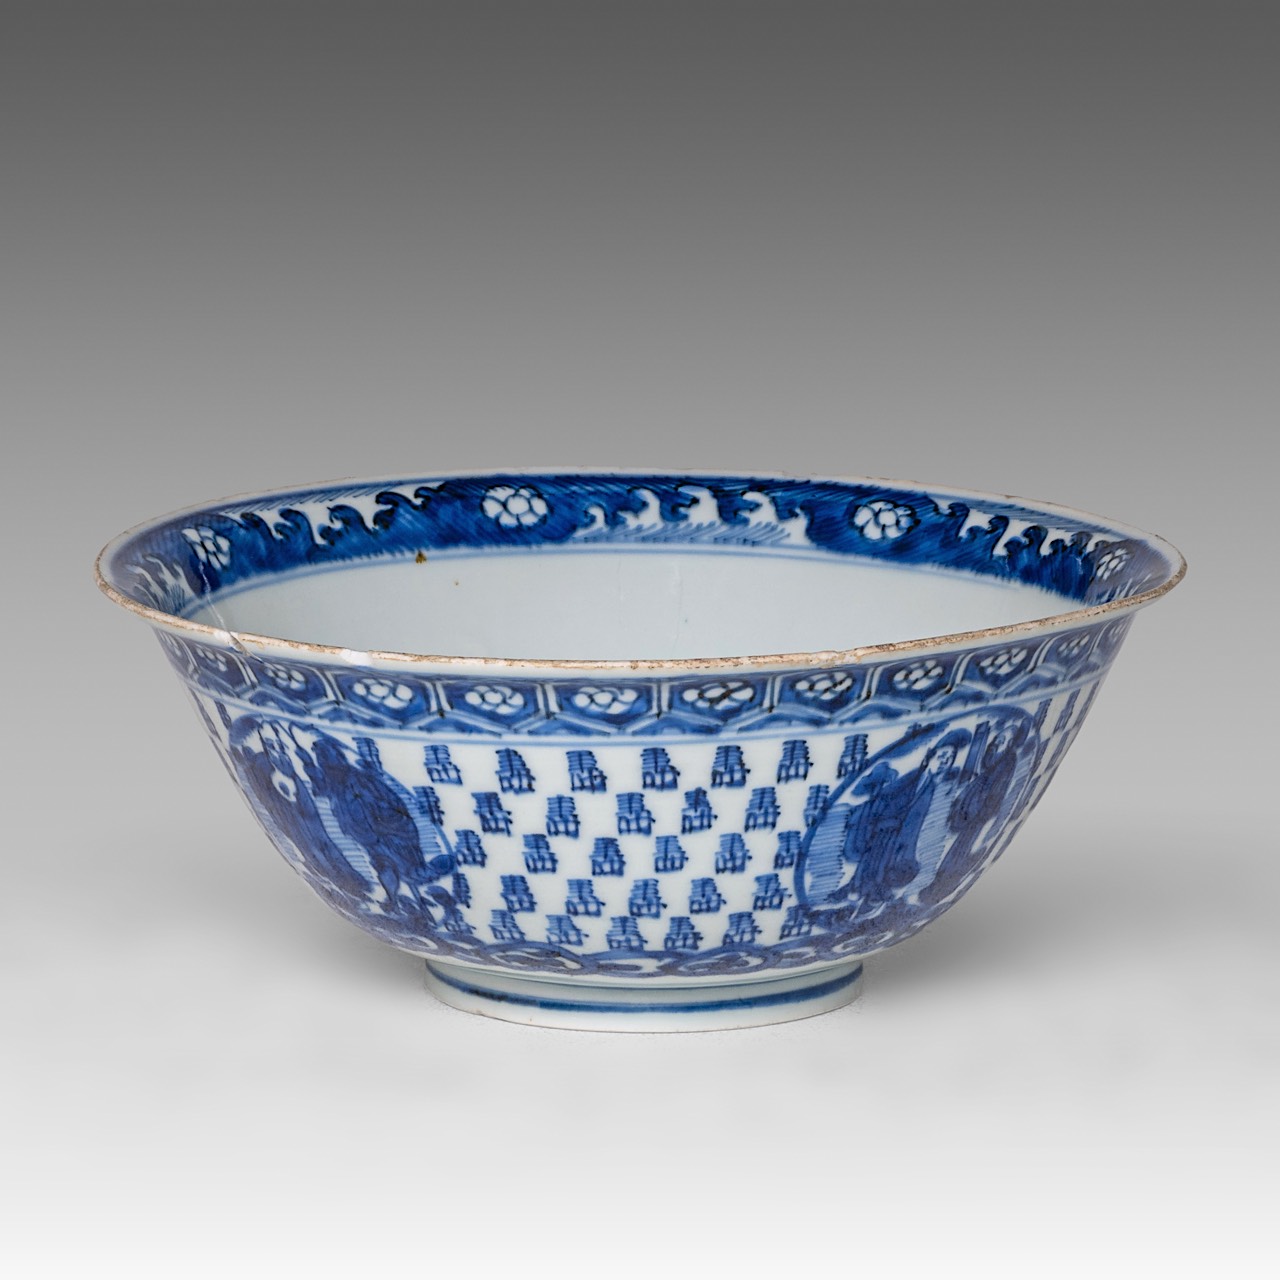 A Chinese blue and white 'Luohan' bowl, Wanli period, Ming dynasty, H 9 - dia 22,5 cm - Image 6 of 8